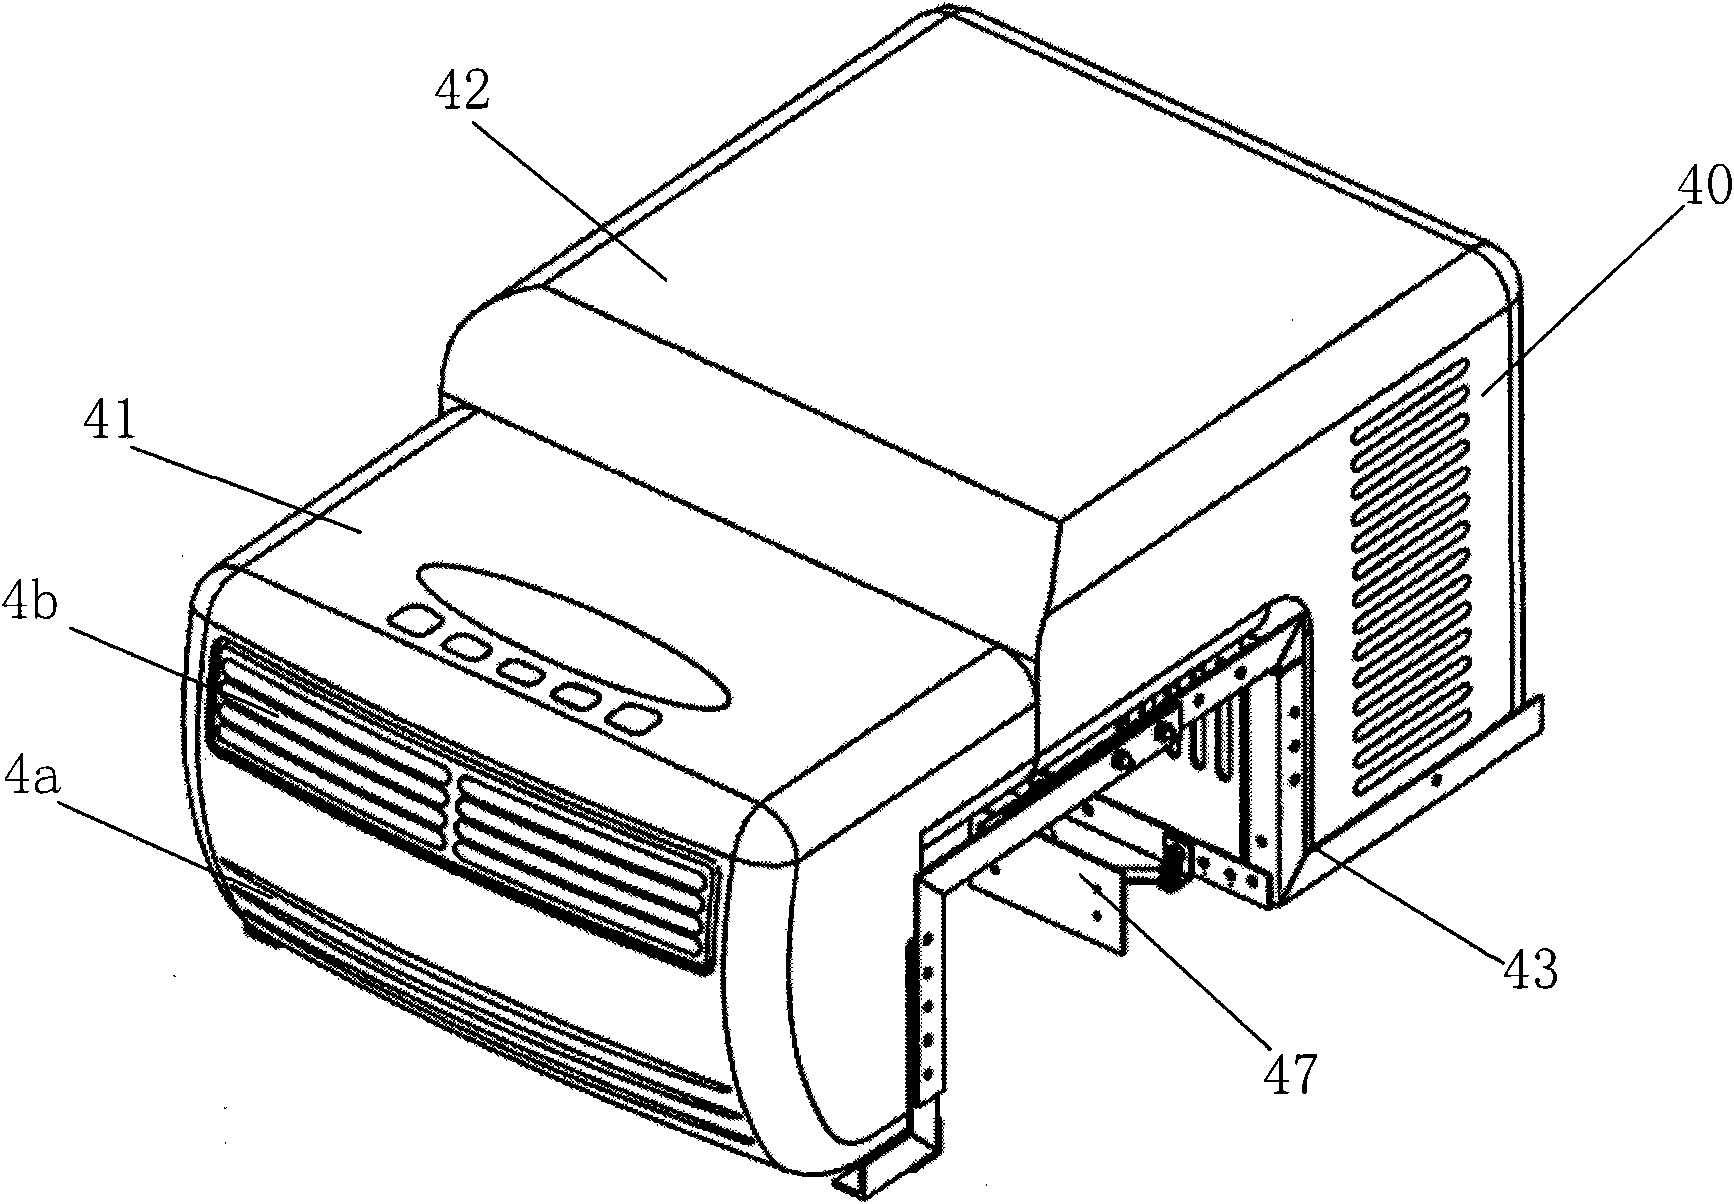 Saddle-shaped window type air-conditioner